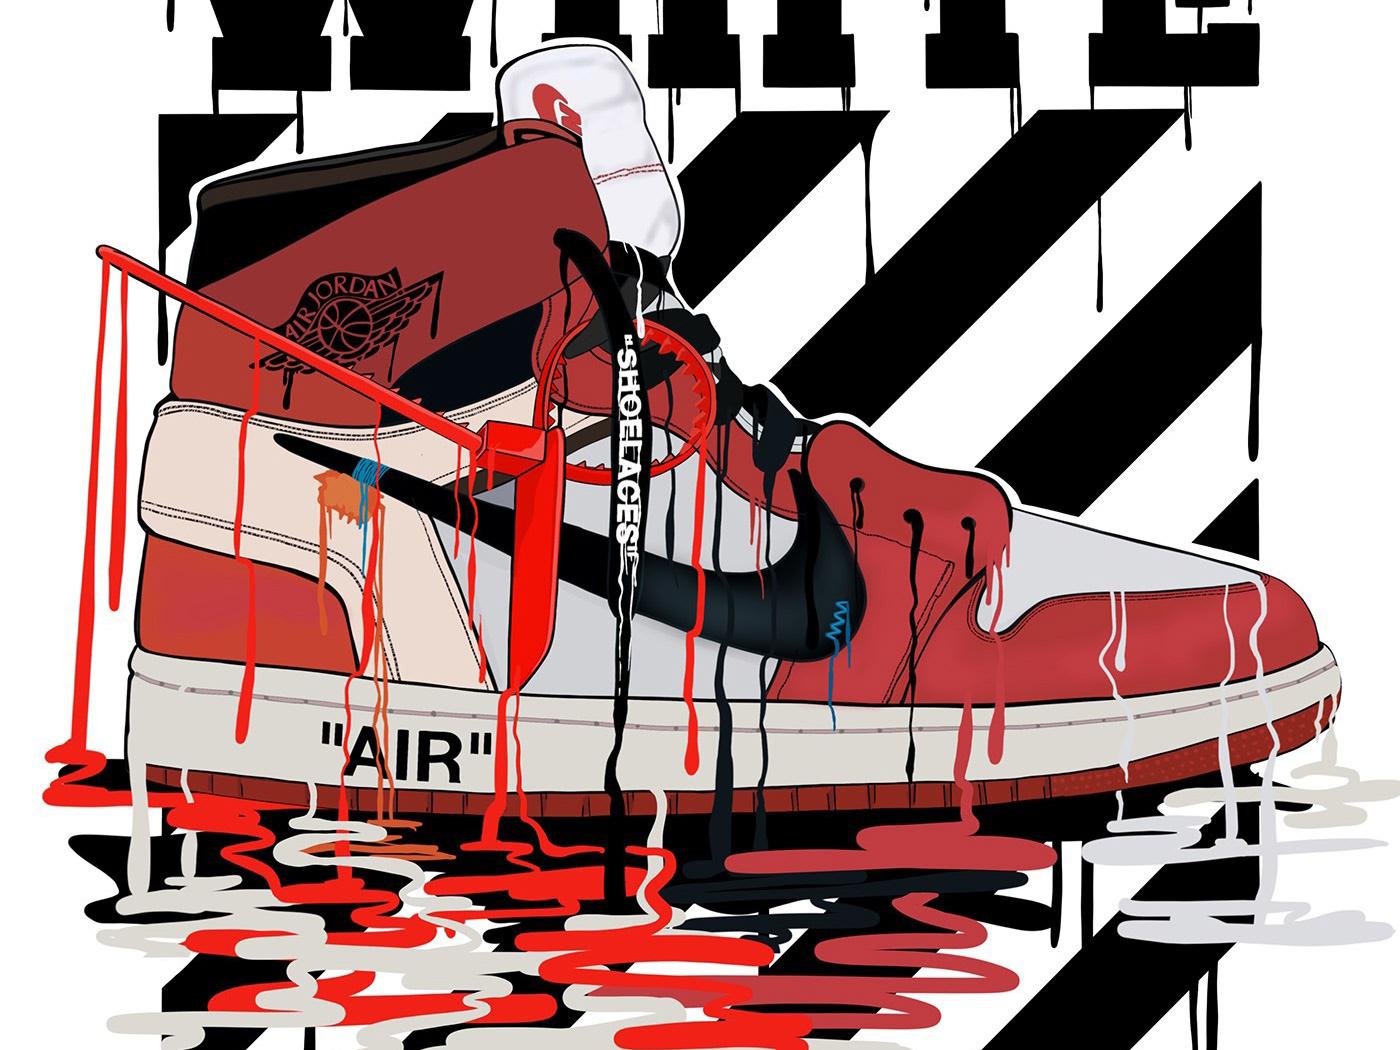 Off-White Nike Wallpapers - Wallpaper Cave